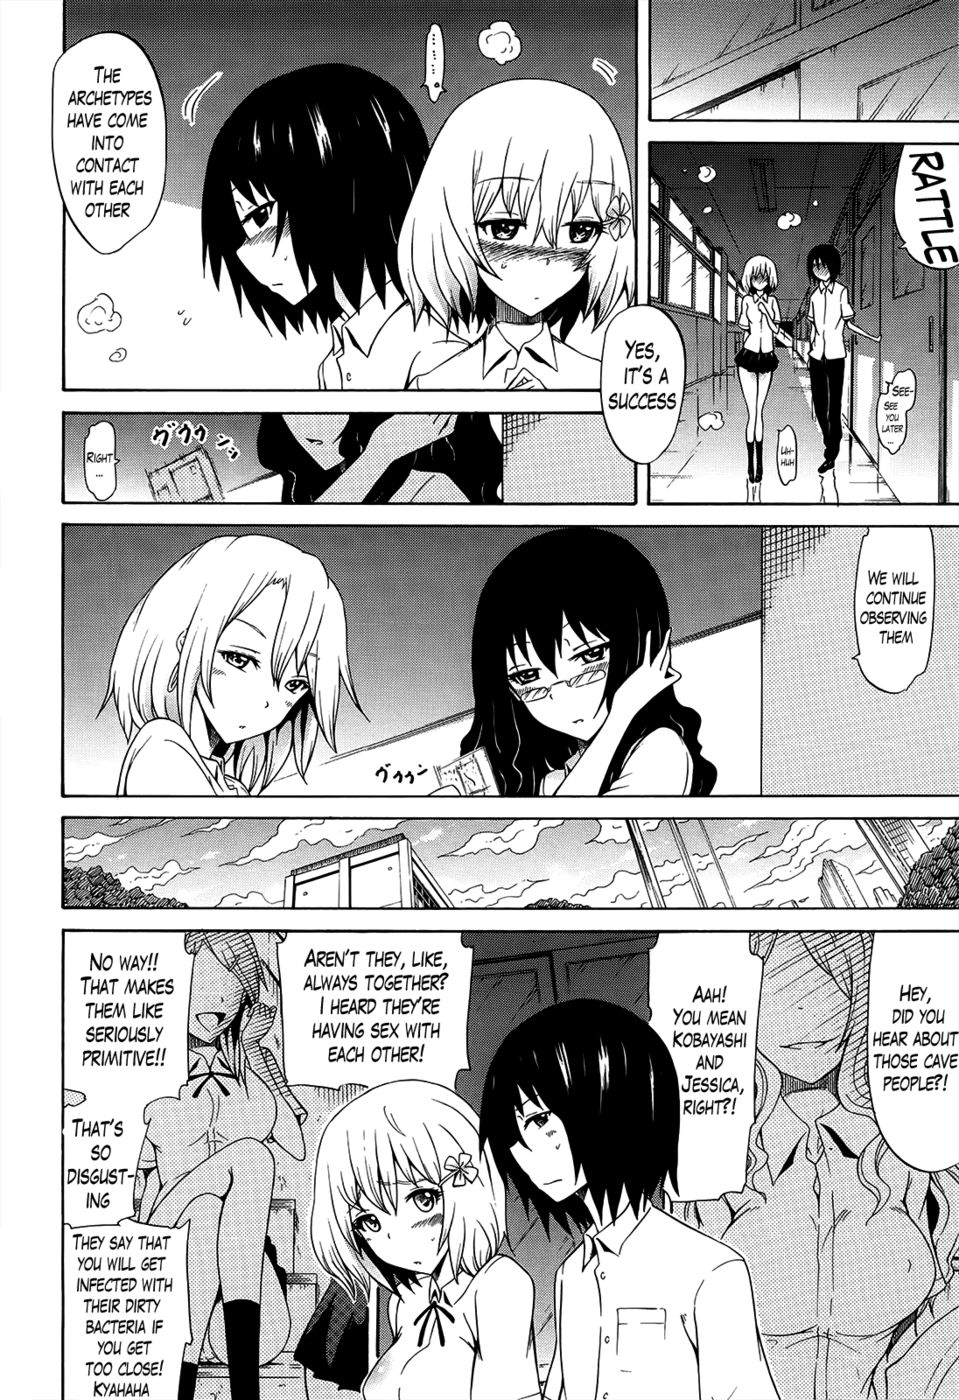 Beautiful Girls Club-Chapter 10-Past Chapter-Utopia-Hentai Manga Hentai Comic - Page: 20 - Online porn video at mobile